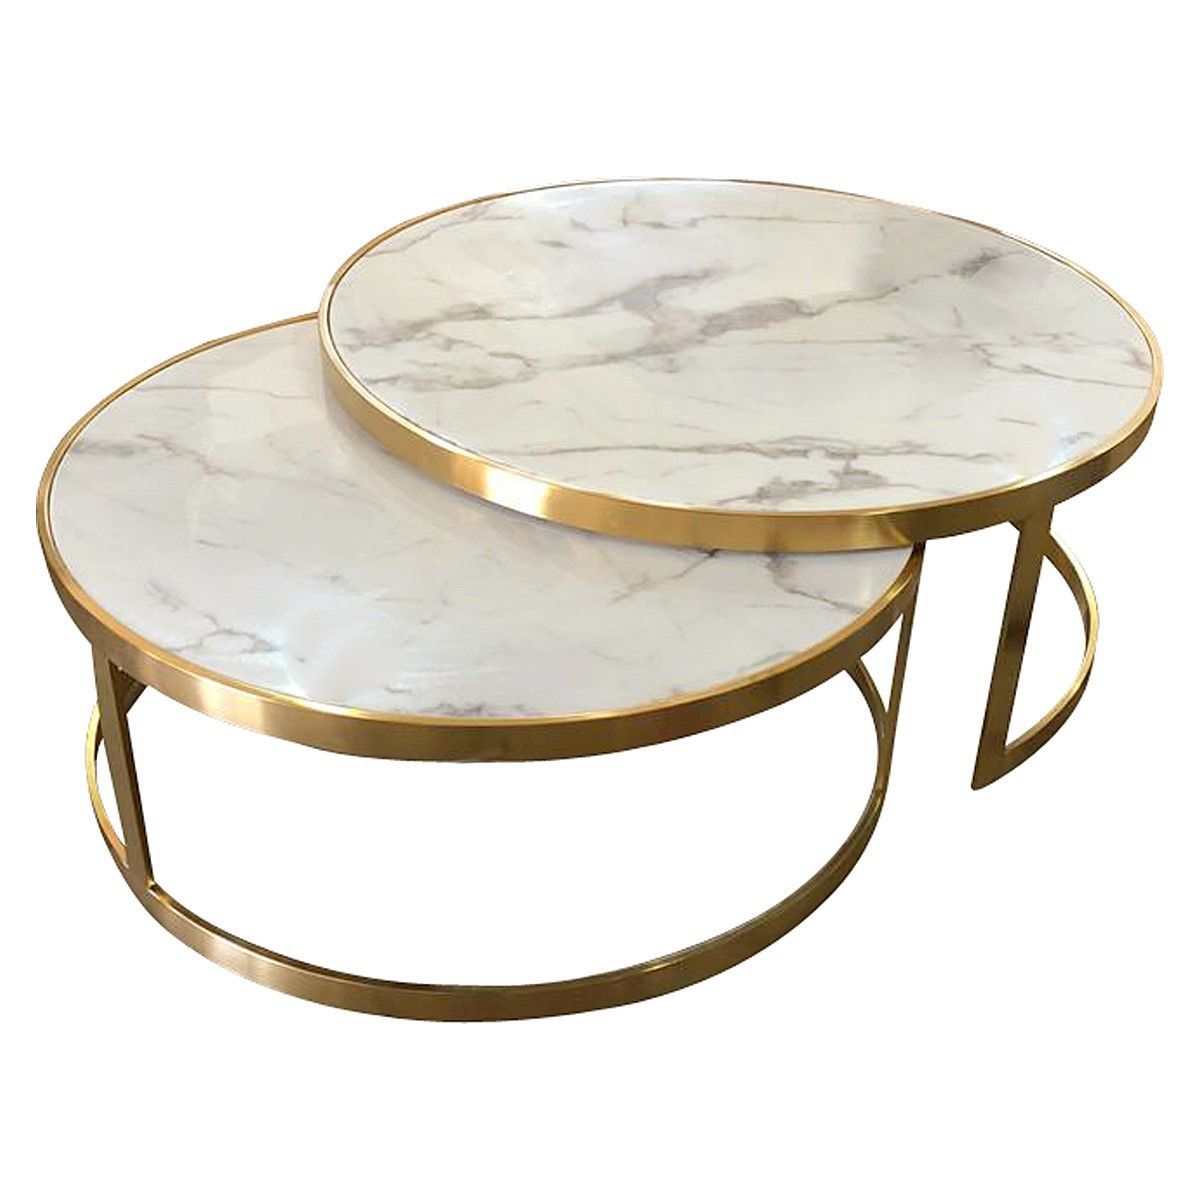 Mirabello 2 Piece Faux Marble Topped Metal Round Nesting Intended For 2020 2 Piece Modern Nesting Coffee Tables (View 16 of 20)